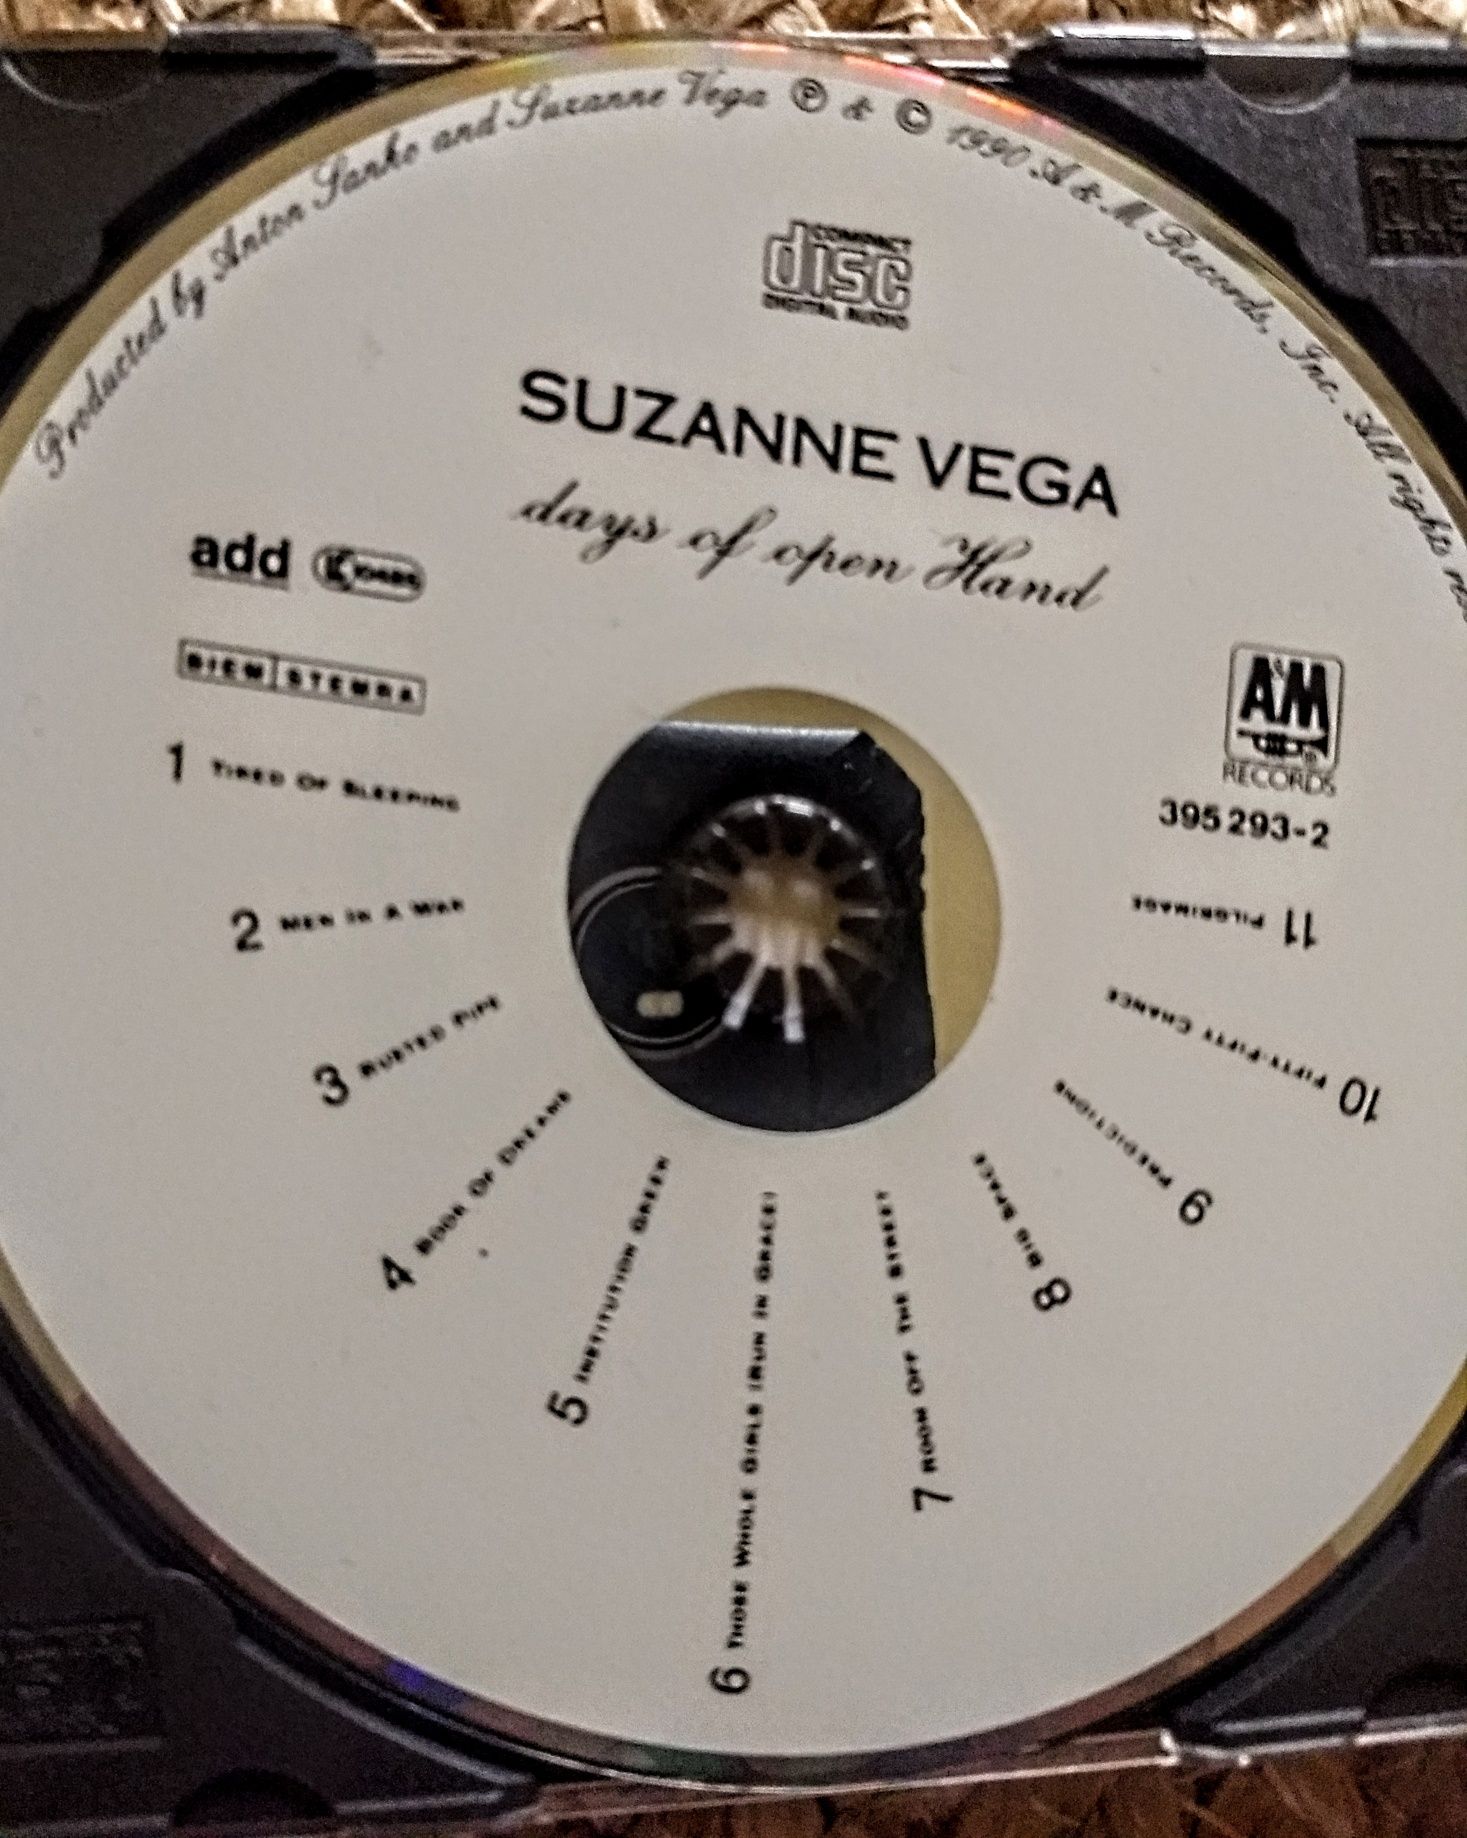 CD Suzanne Vega "Days of Open Hand"